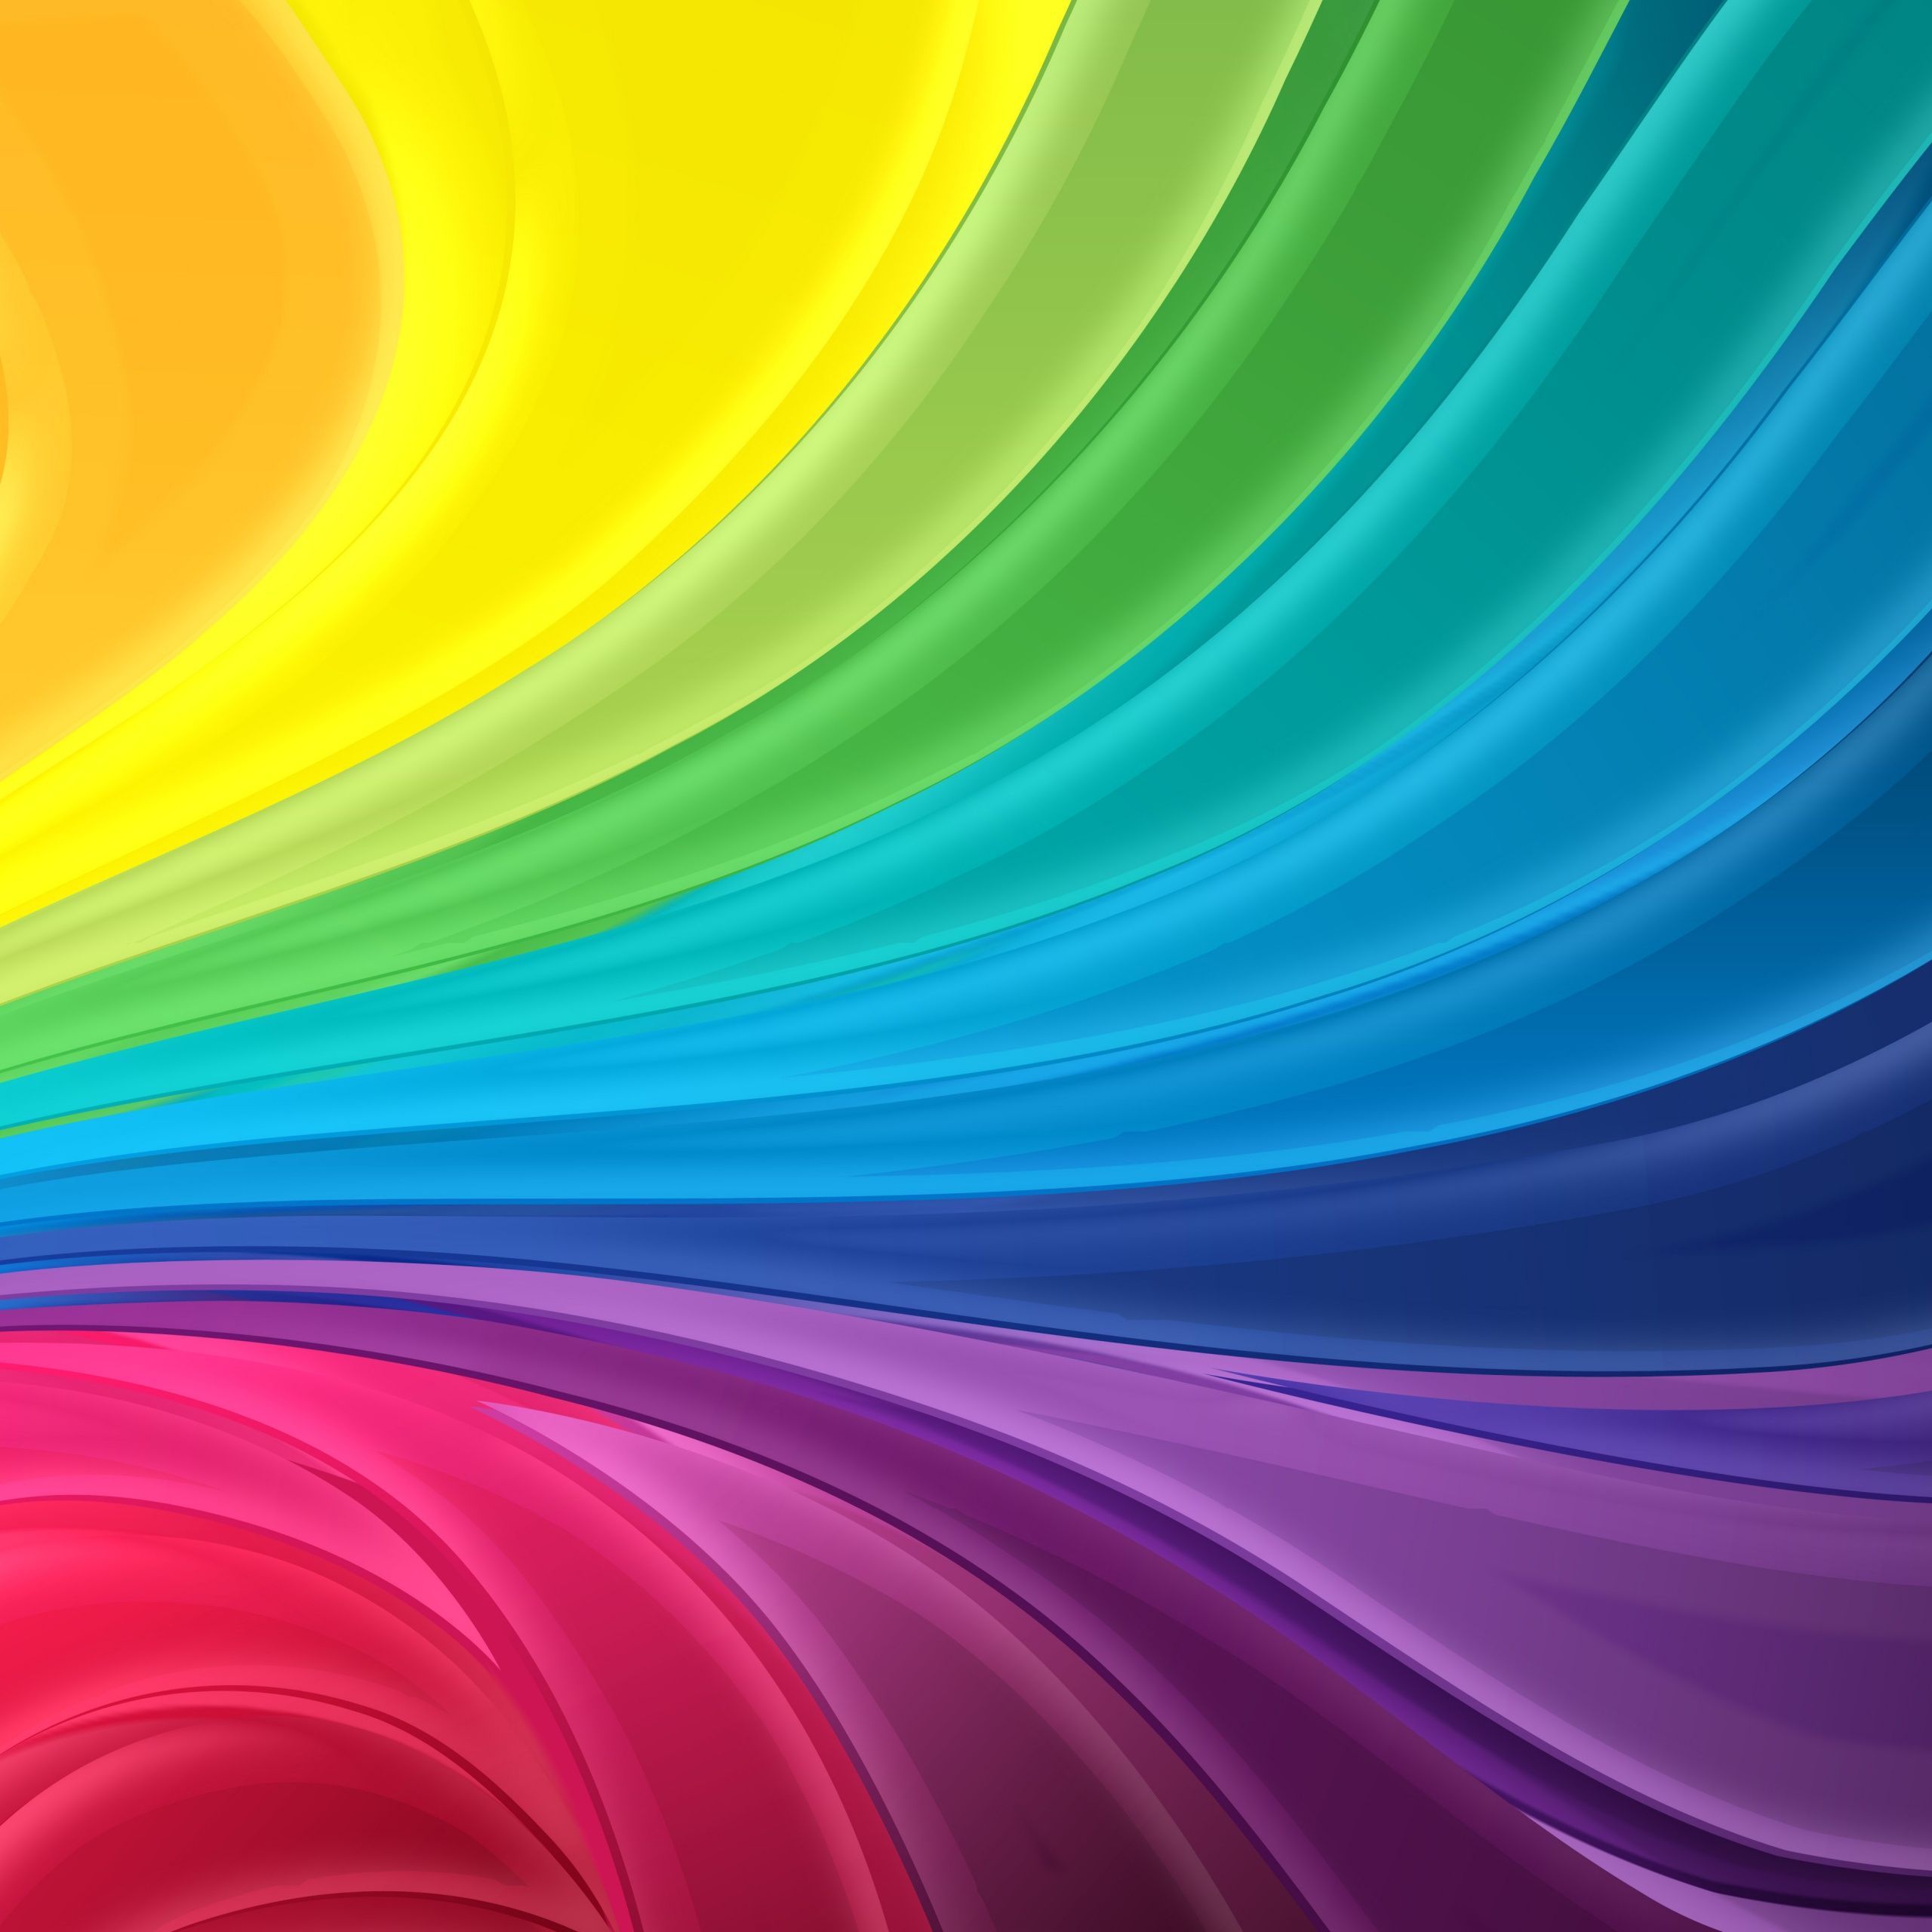 A colorful abstract background with rainbow colors - Colorful, rainbows